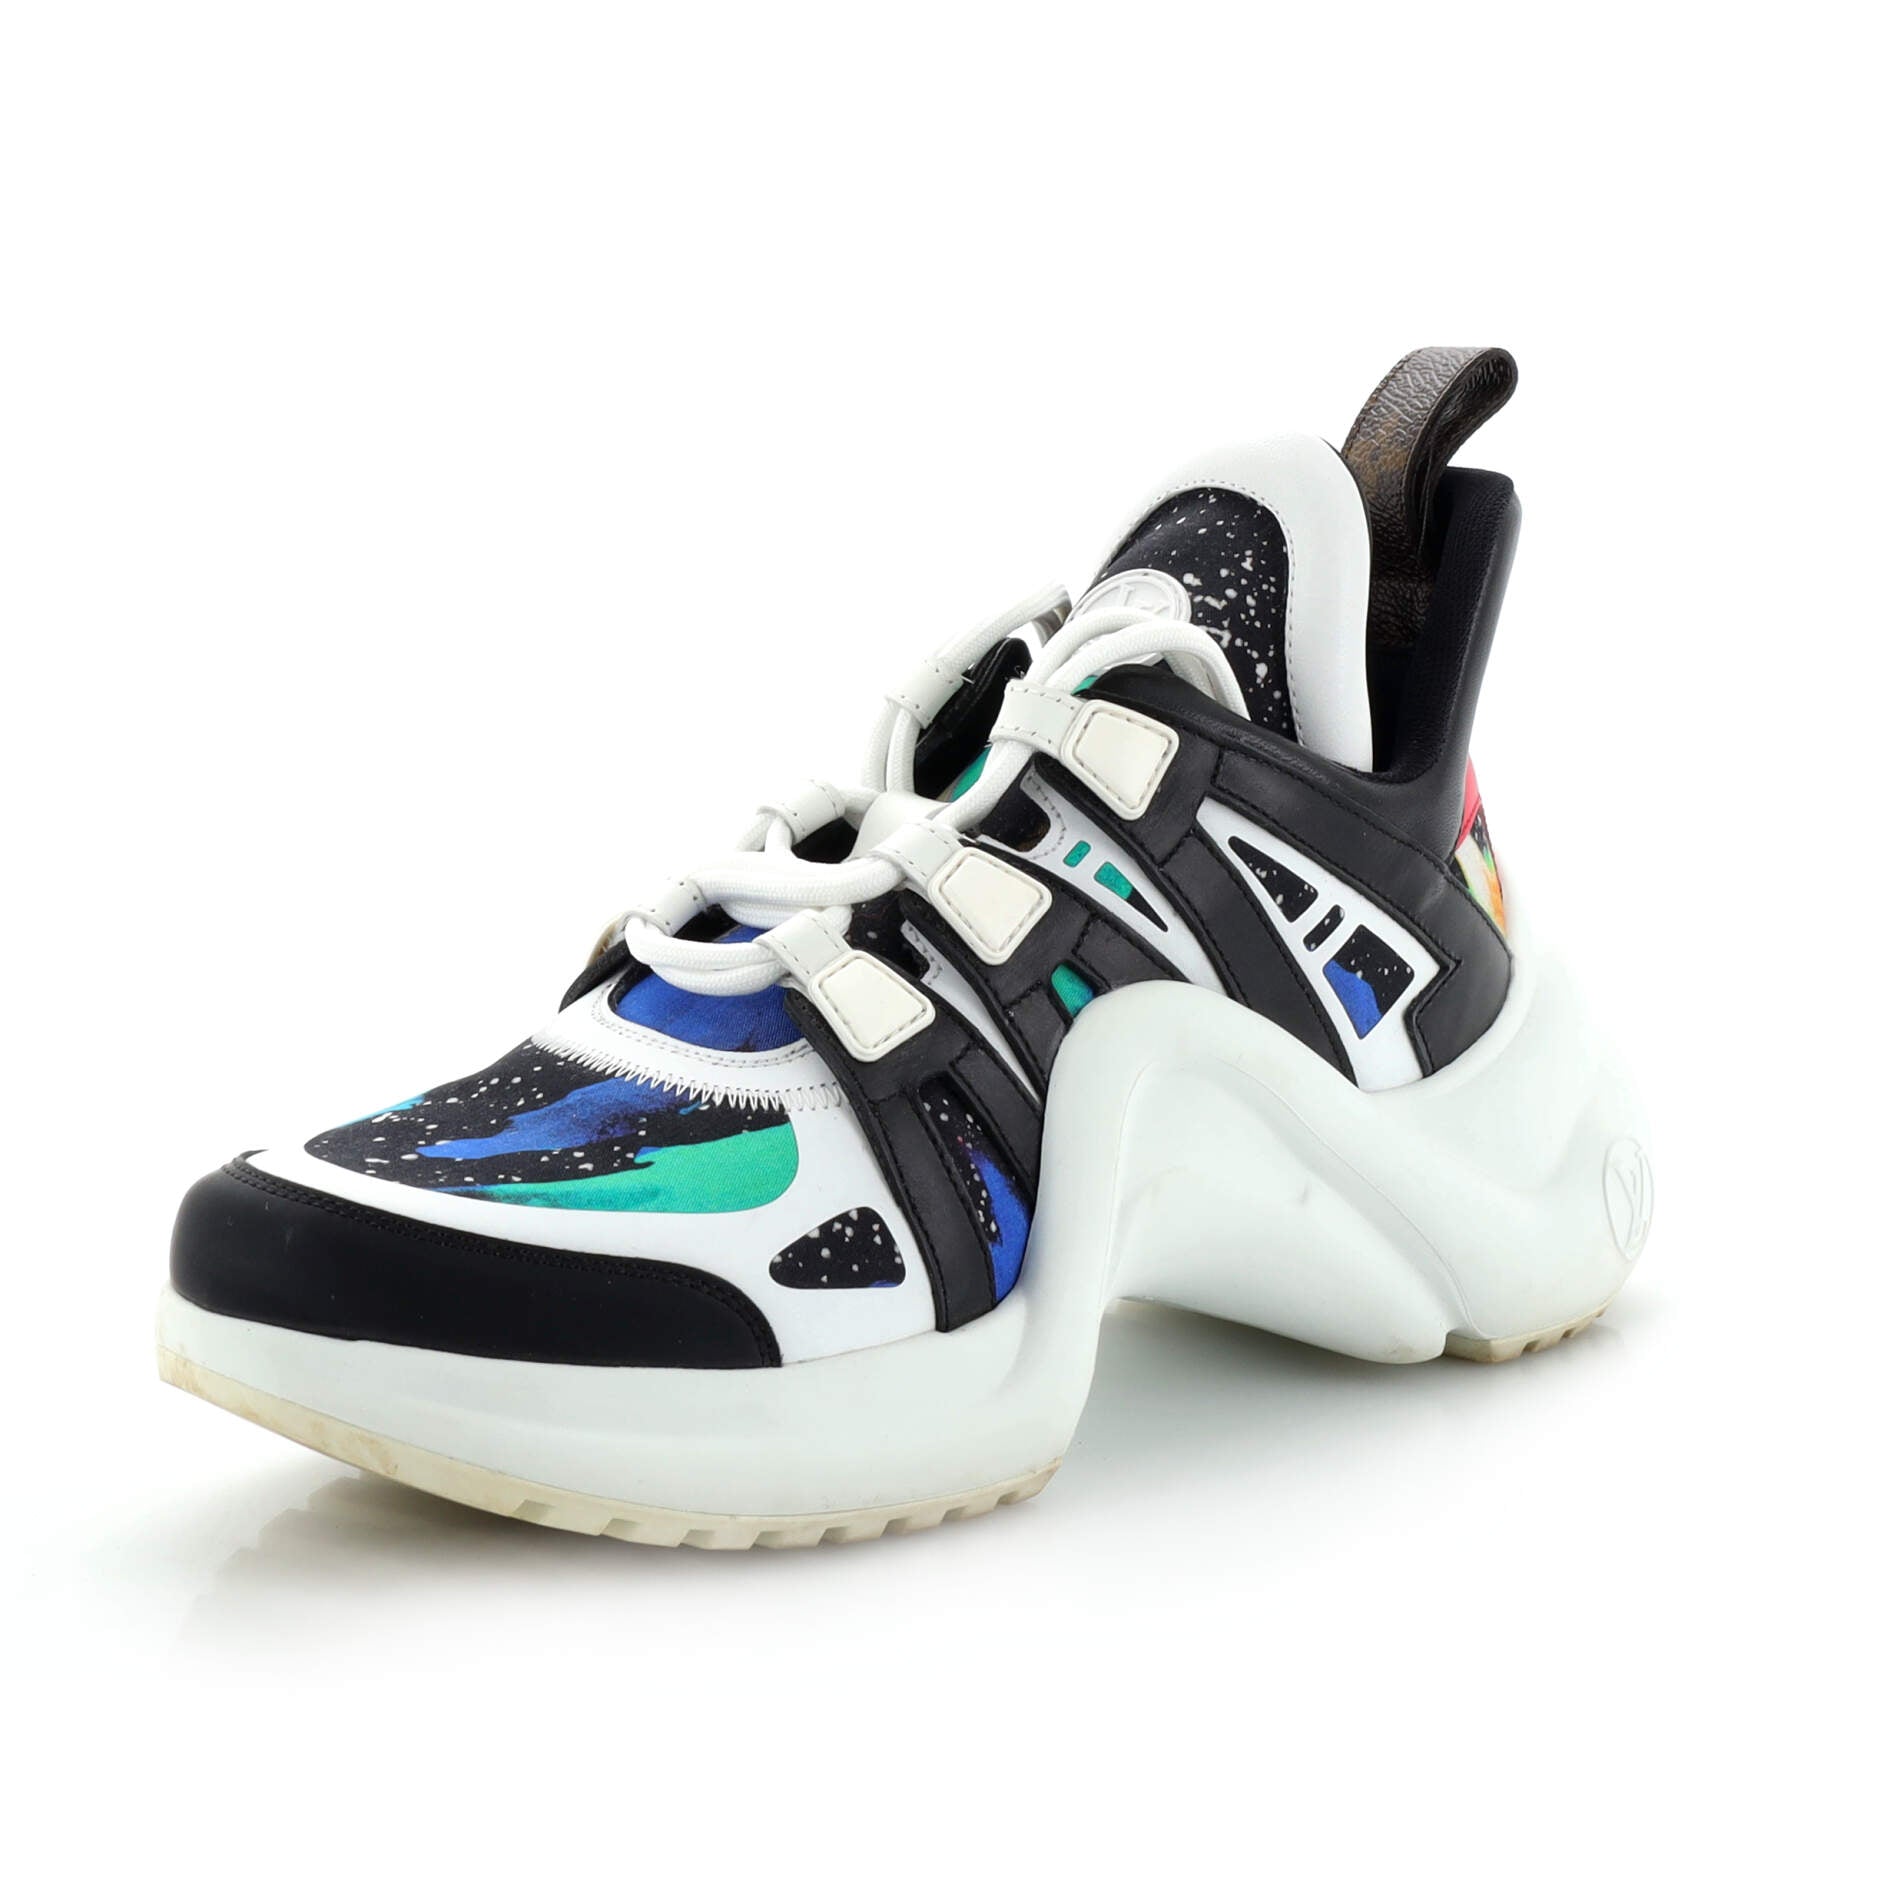 Women's LV Archlight Sneakers Multicolor Nylon and Leather